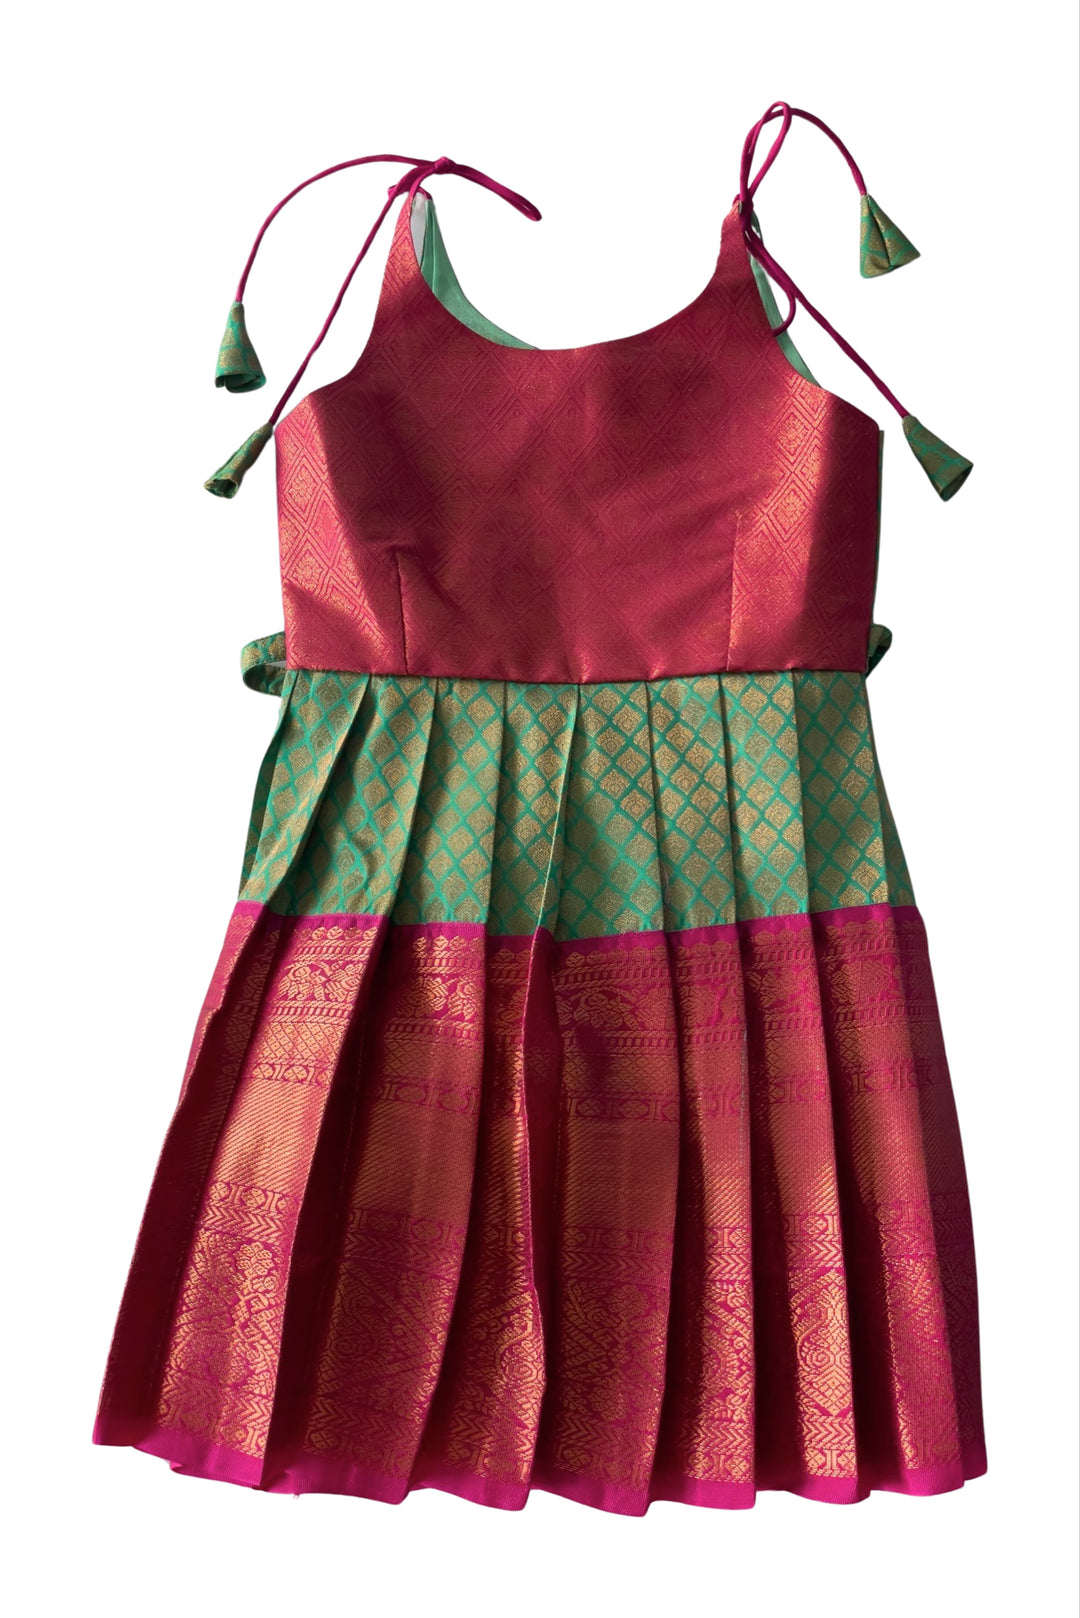 The Nesavu Tie-up Frock Chic Magenta and Green Tie-Up Silk Frock for Girls - Traditional Elegance Nesavu 14 (6M) / Green / Style 1 T304A-14 Girls Magenta & Green Silk Frock | Festive Tie-Up Design | Classic Cultural Attire | The Nesavu